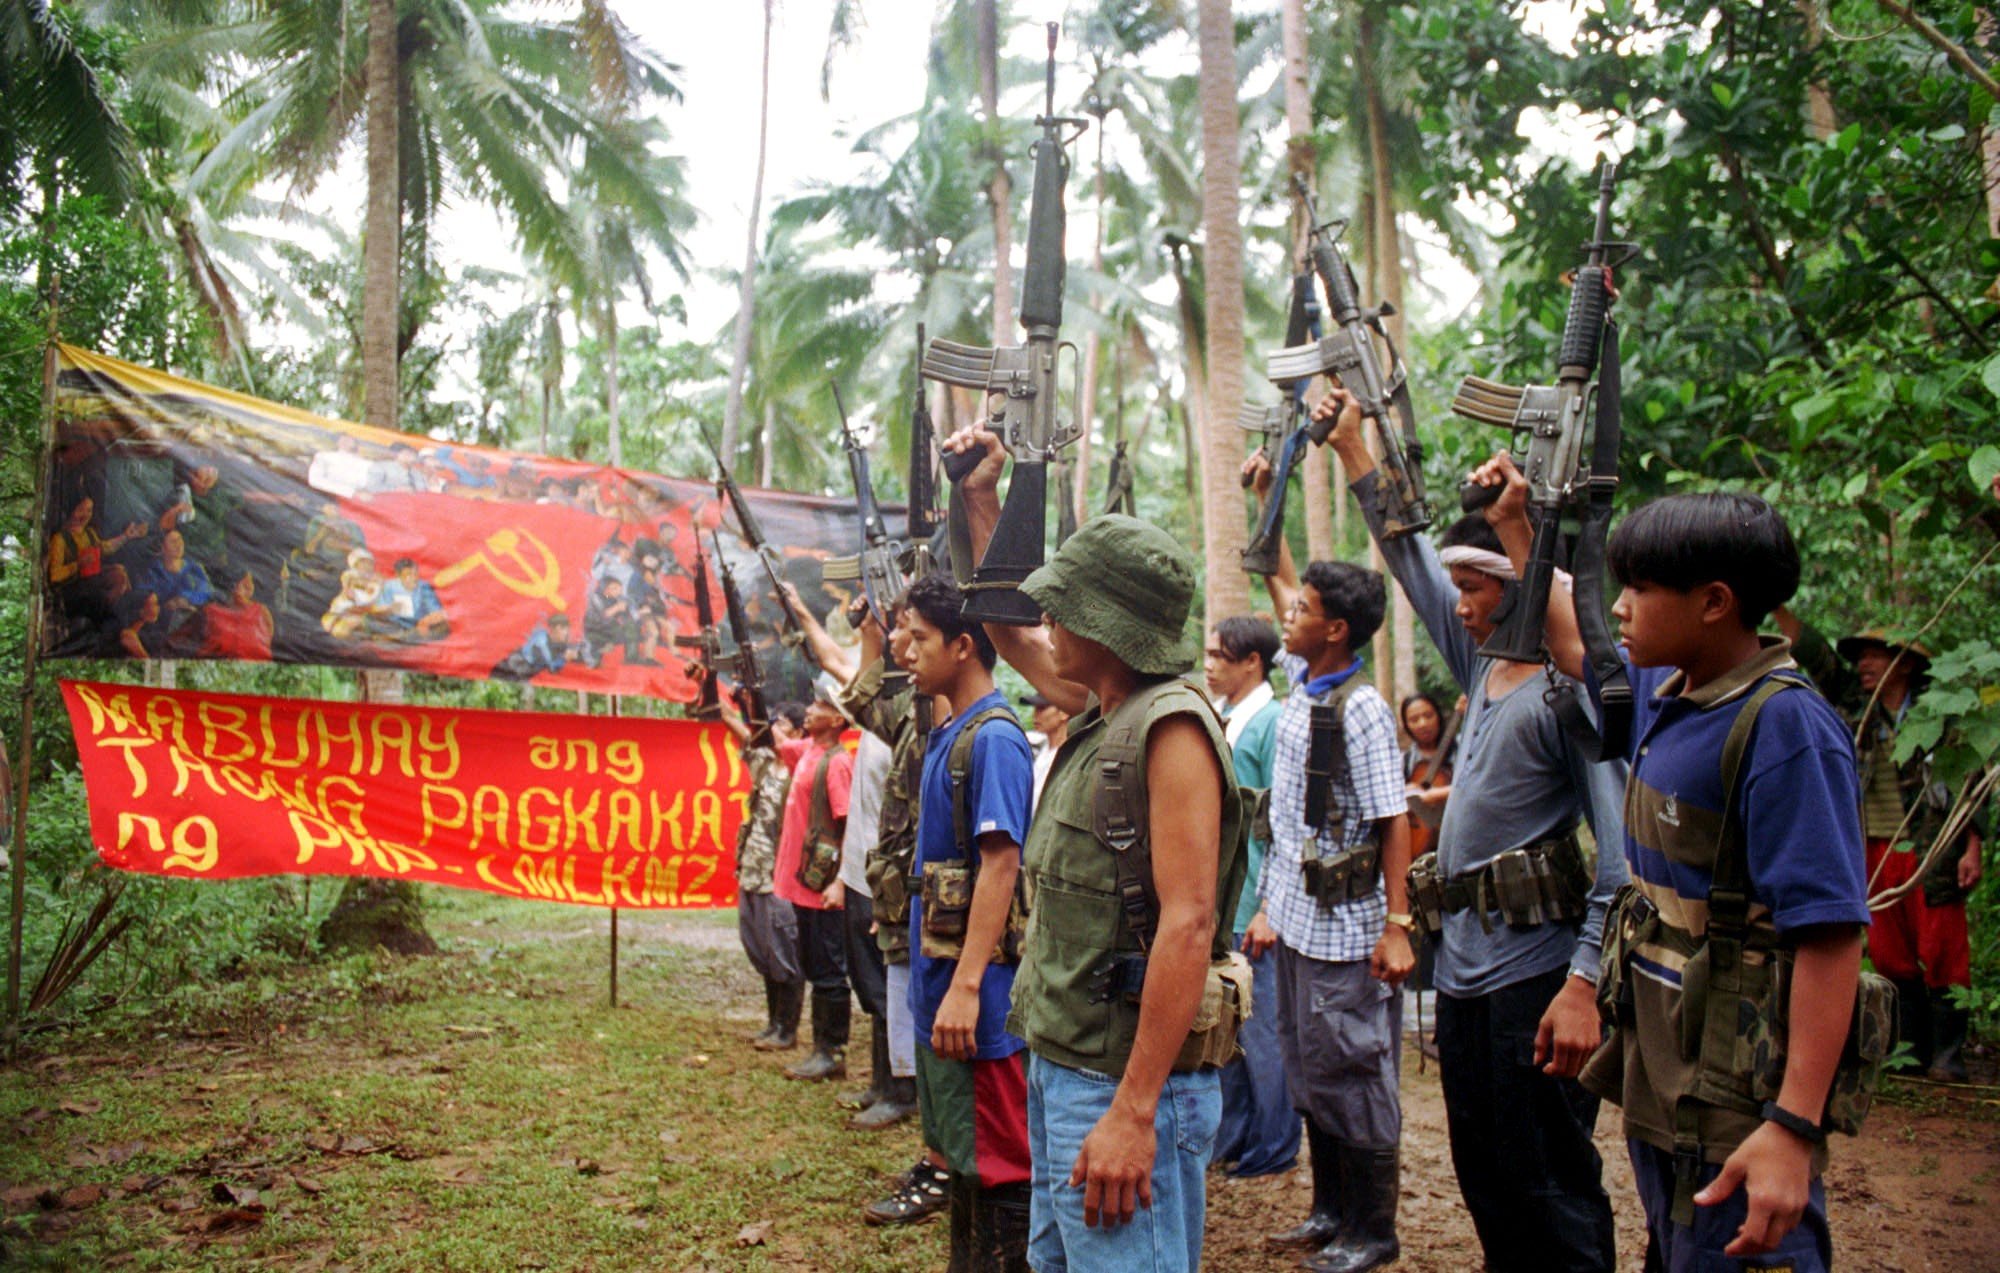 New People's Army guerillas raise their firearms to mark a previous anniversary in 1998. Photo: AP